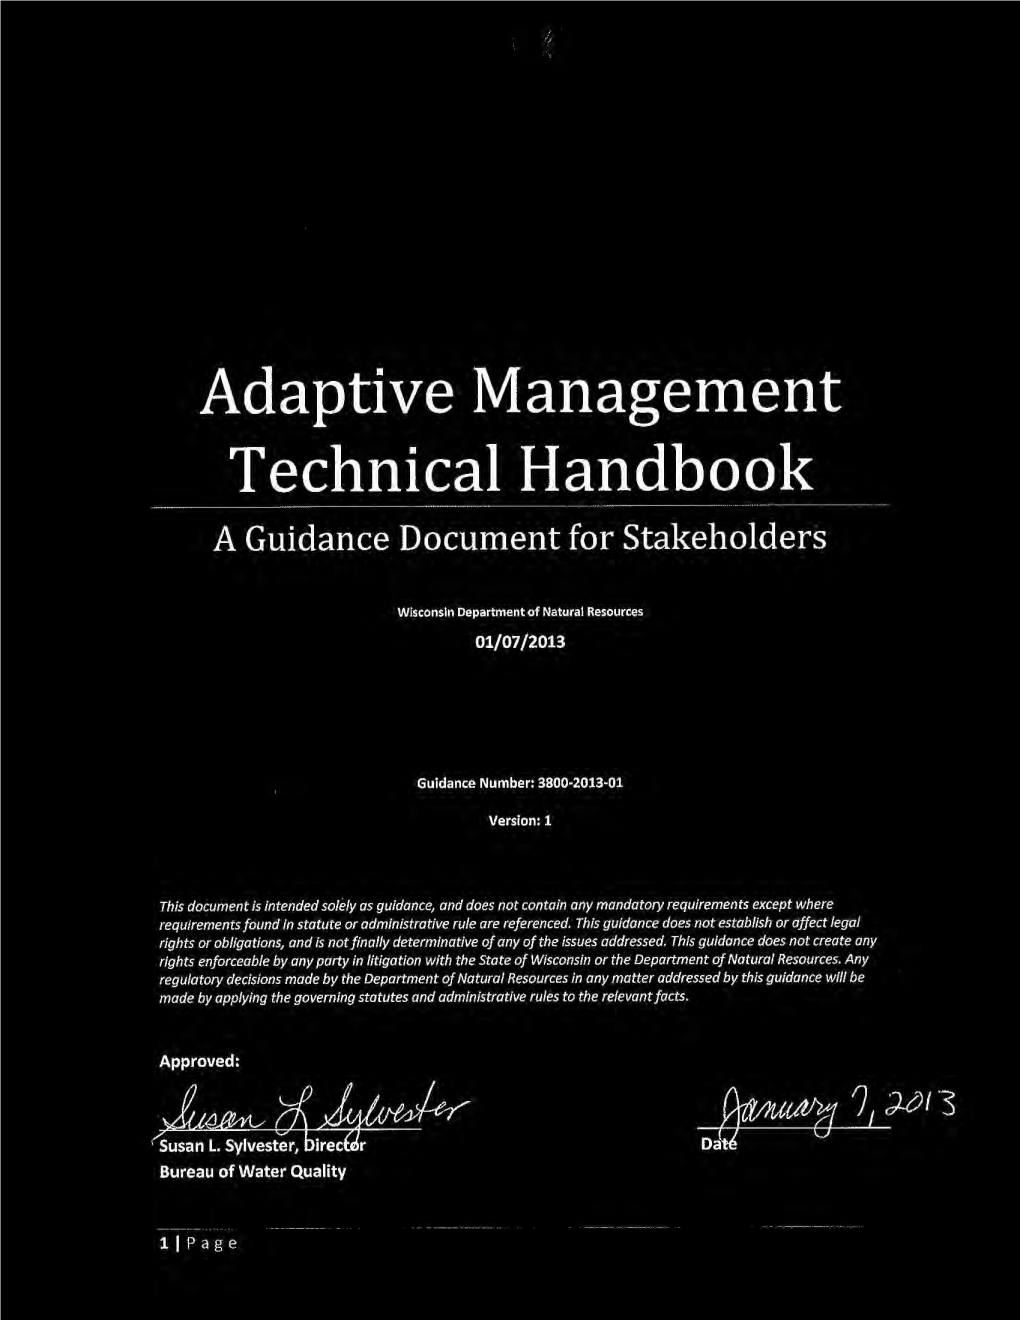 Adaptive Management Handbook Is Designed to Be a Comprehensive Document to Provide Guidance to a Large Number of User Groups and Audiences